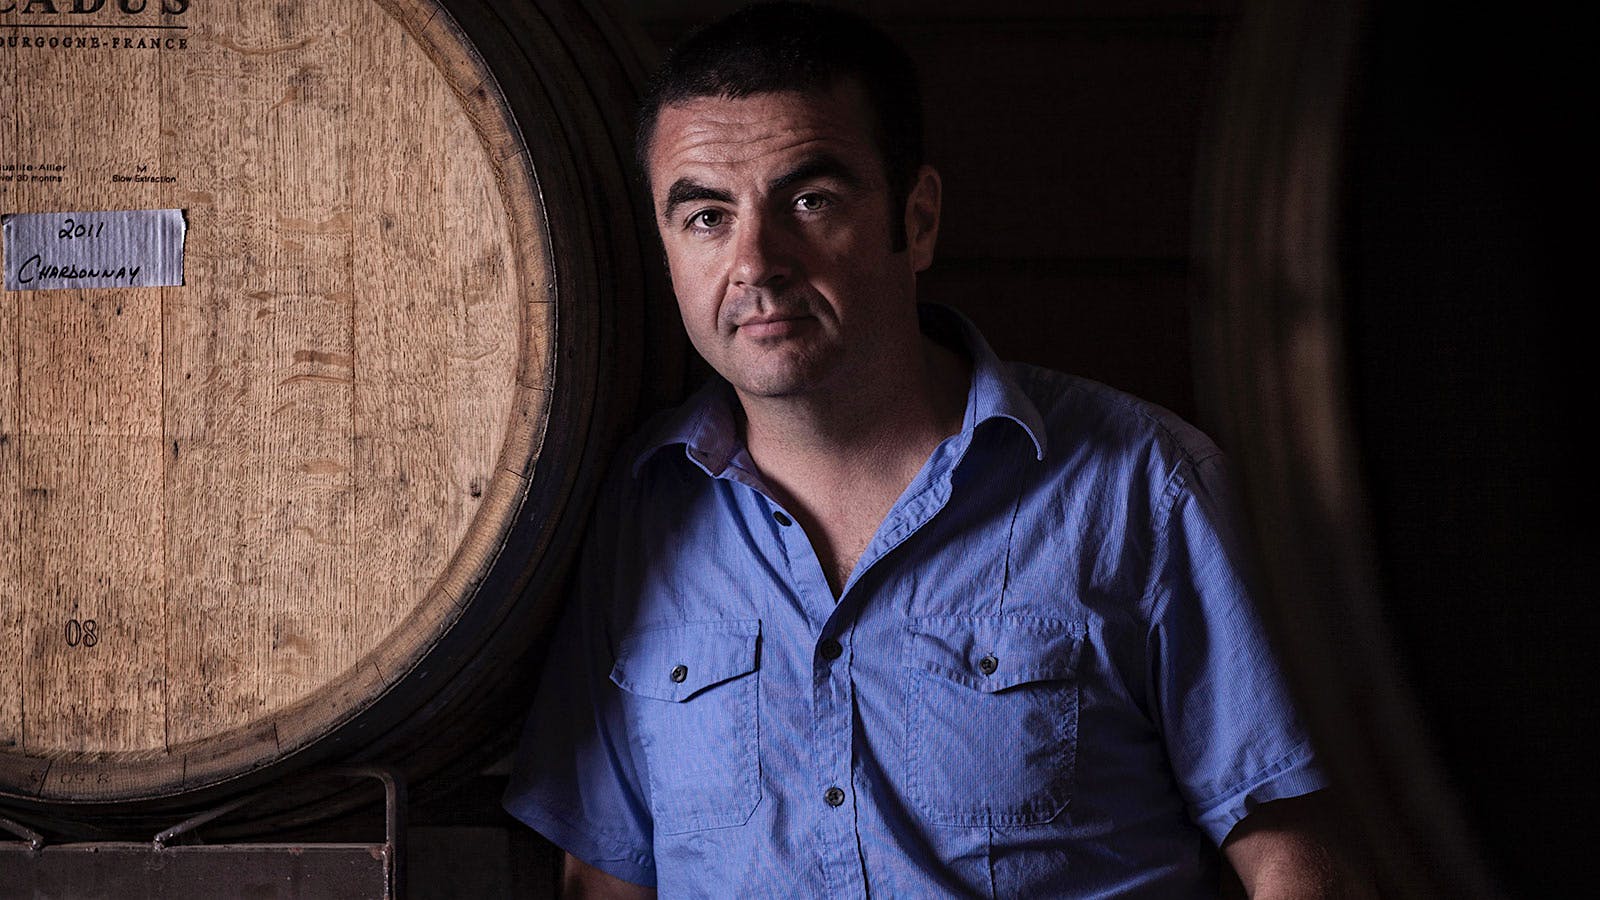 Ben Parsons Resigns as Winemaker of The Infinite Monkey Theorem